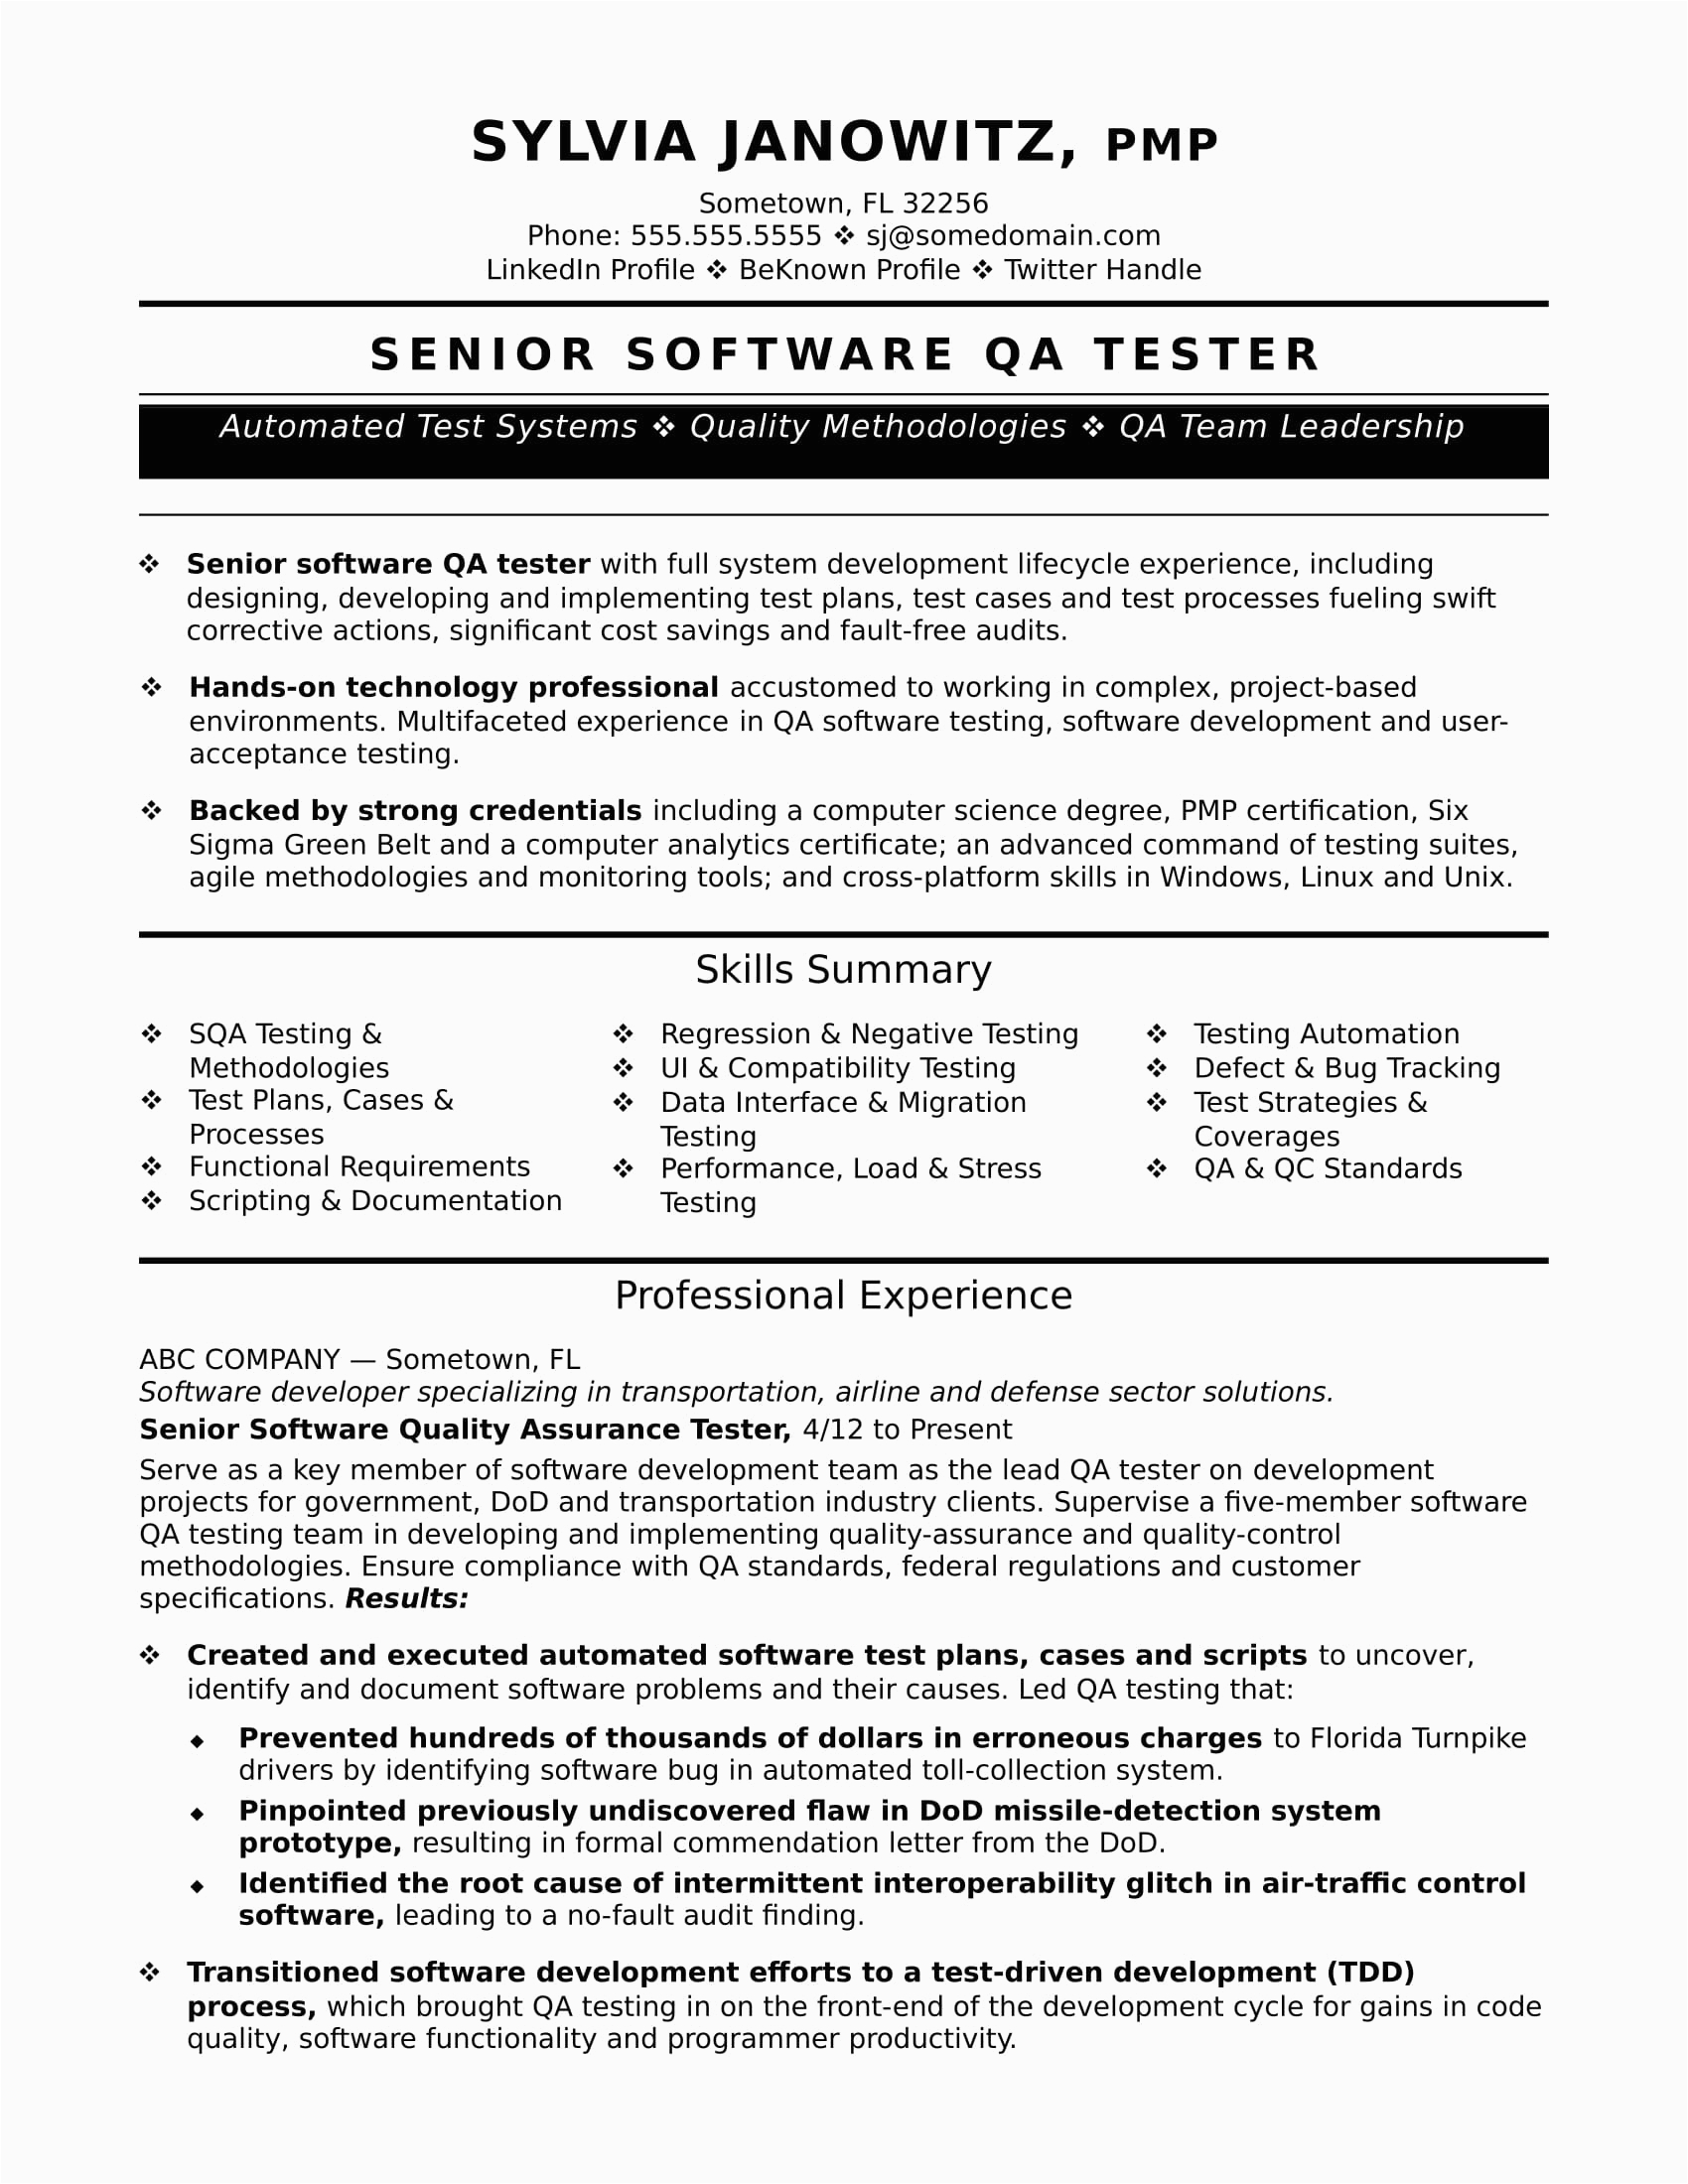 Sample Qa Resume with Retail Experience Experienced Qa software Tester Resume Sample